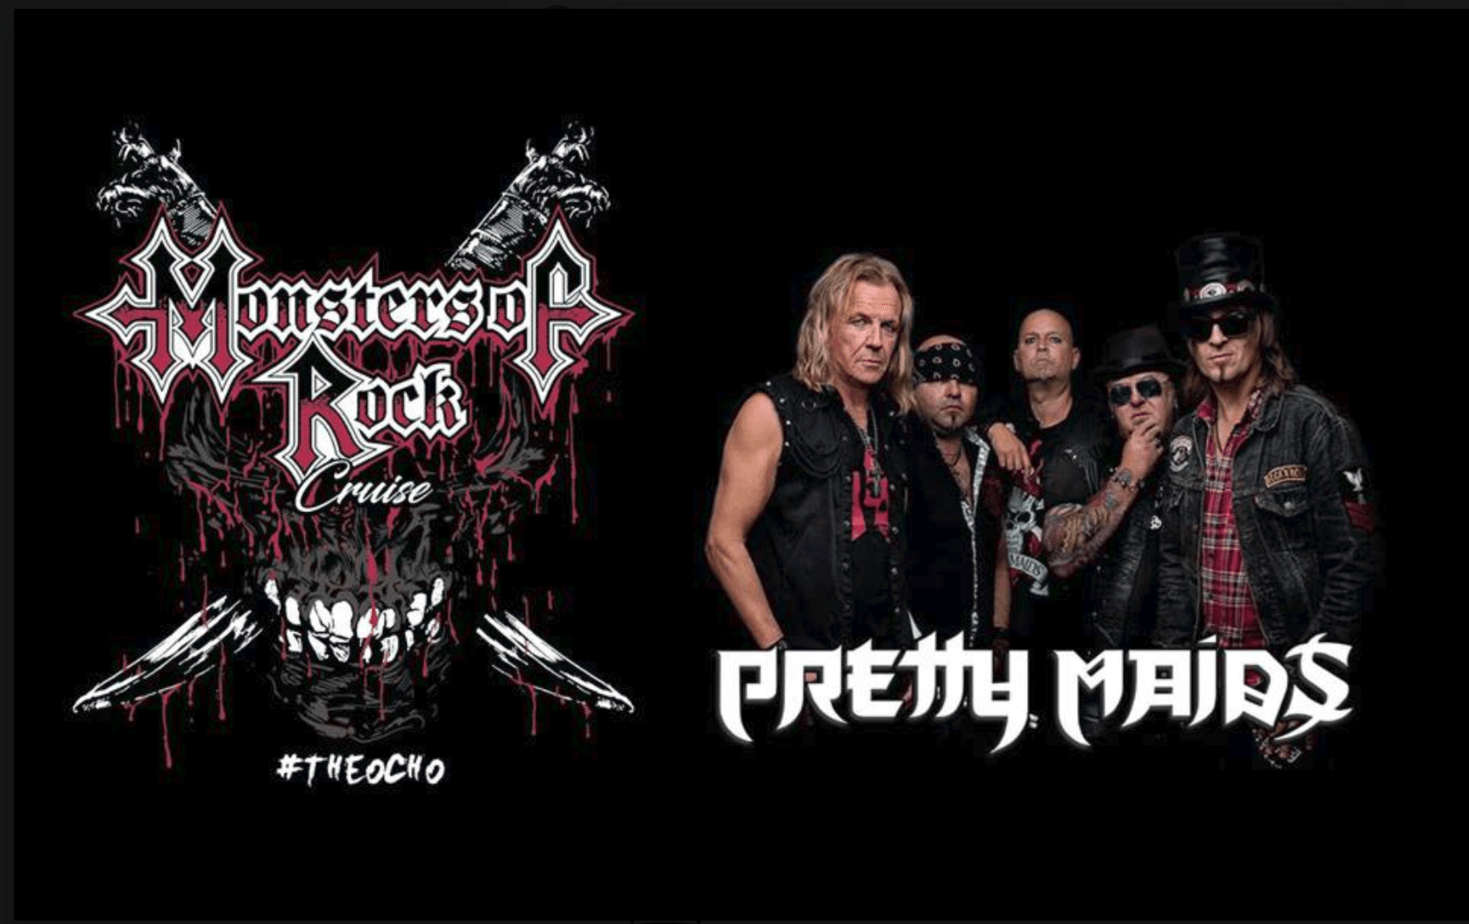 Pretty Maids webside cover